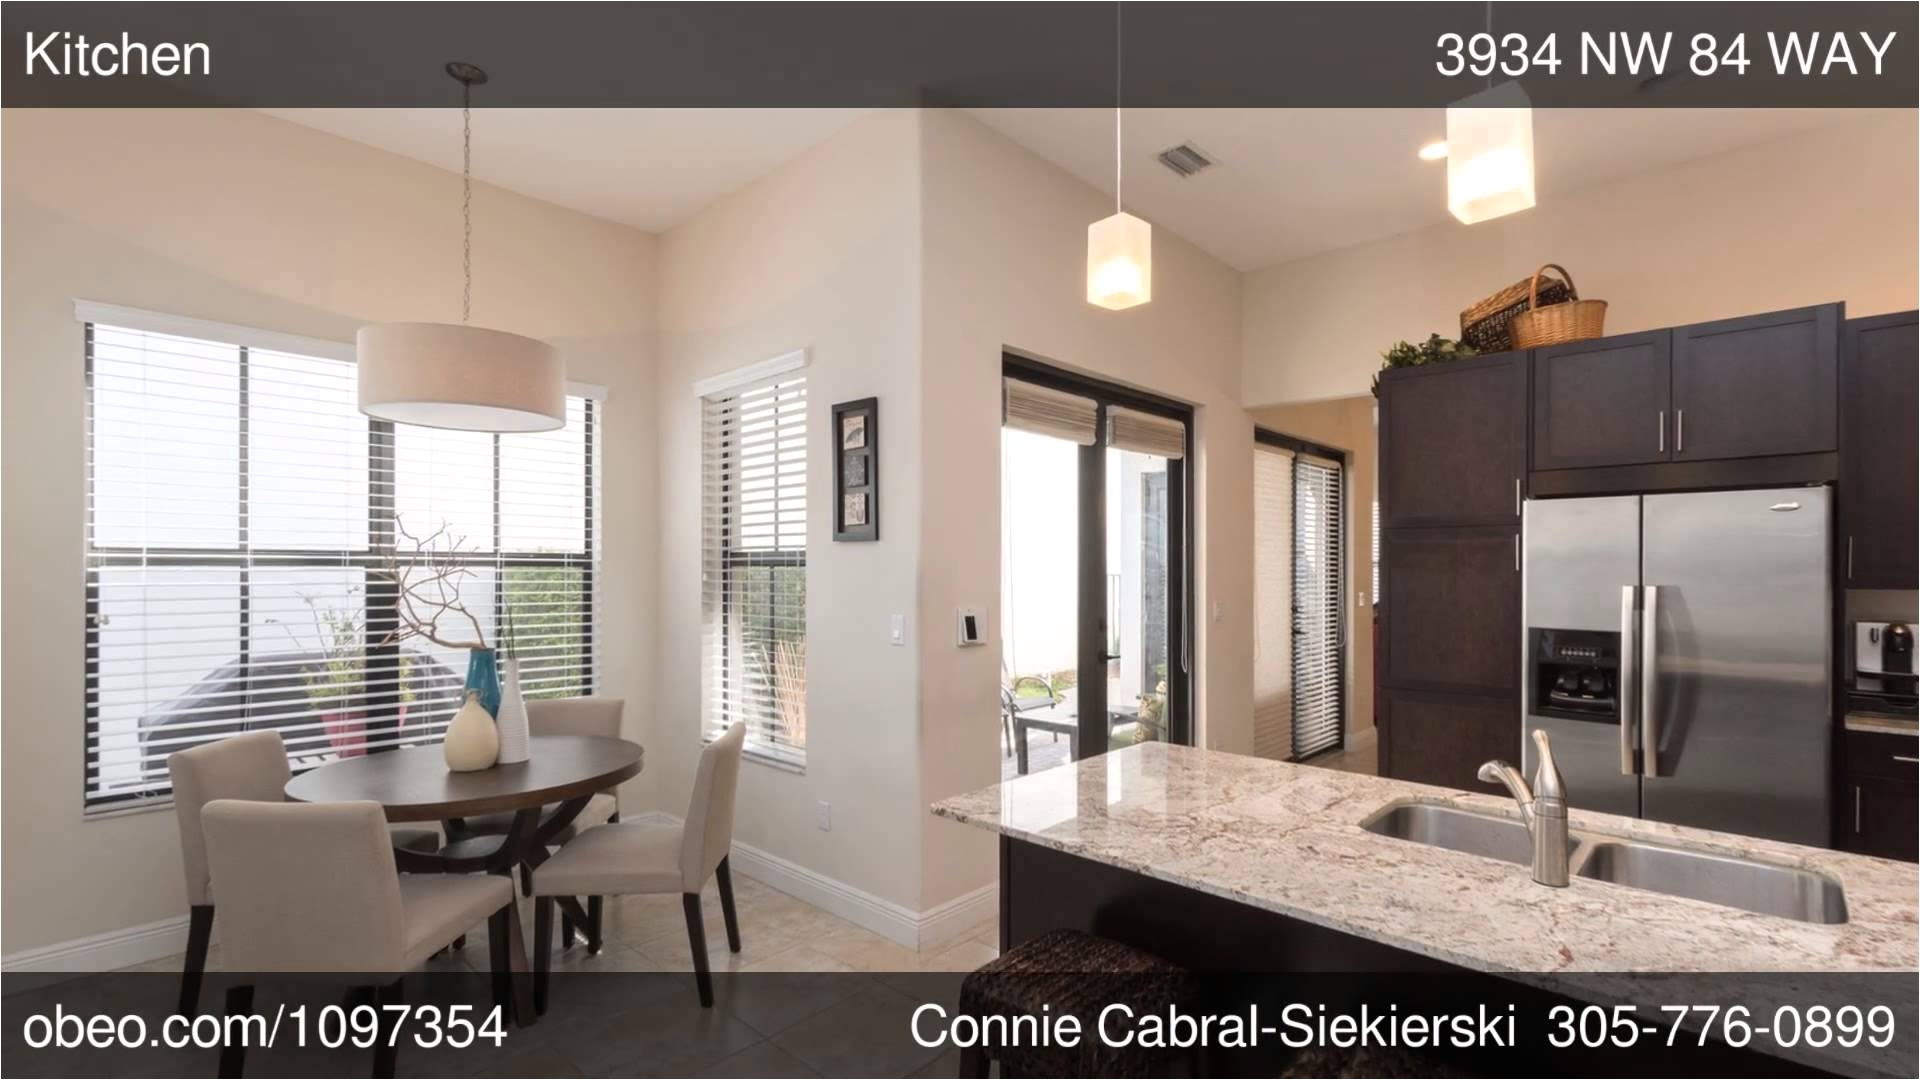 3934 nw 84 way cooper city monterra homes for sale connie cabral group